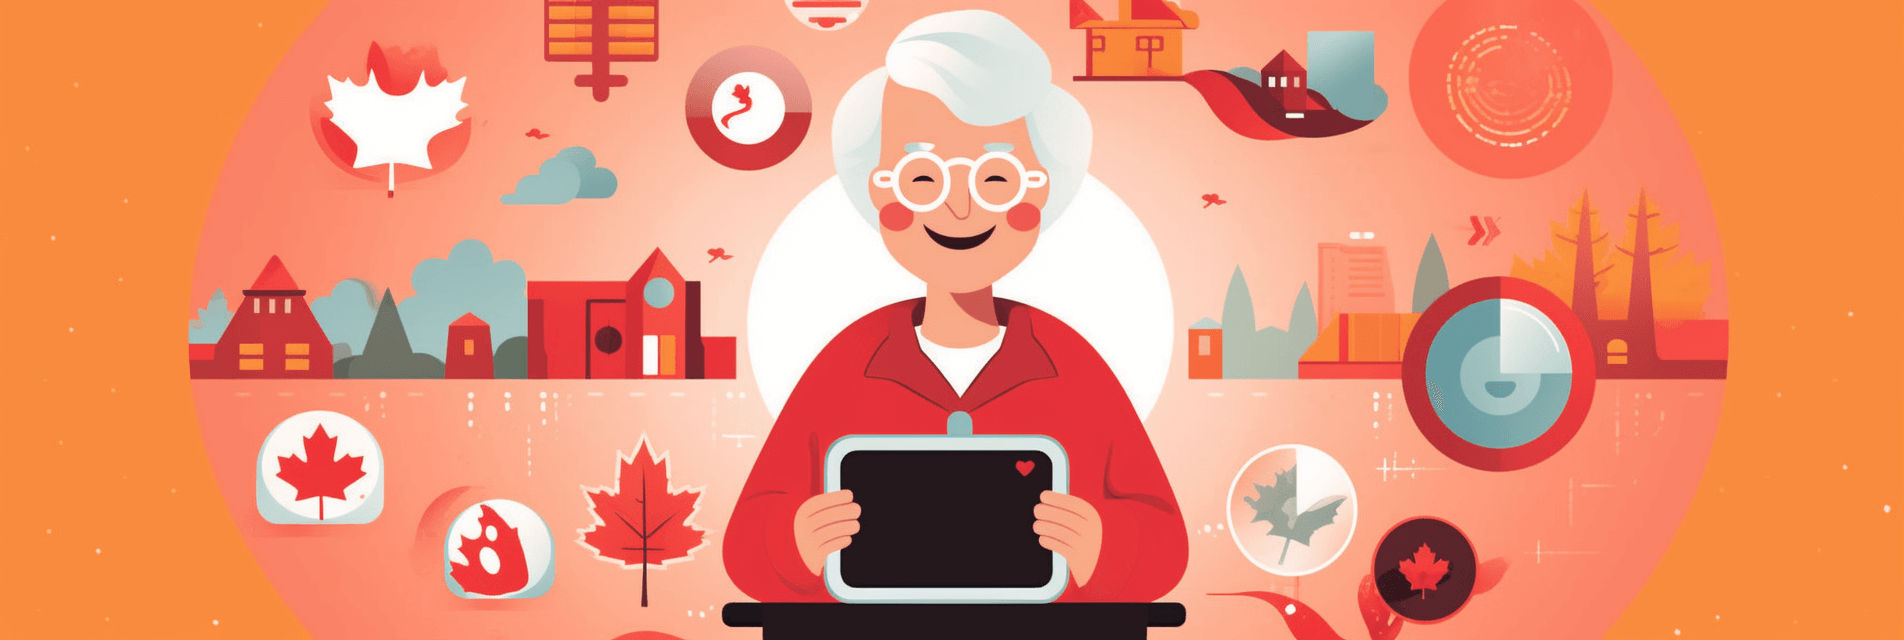 Design an image featuring a senior canadian citizen using 24386a9b8f4b2ad6944a5fafb3